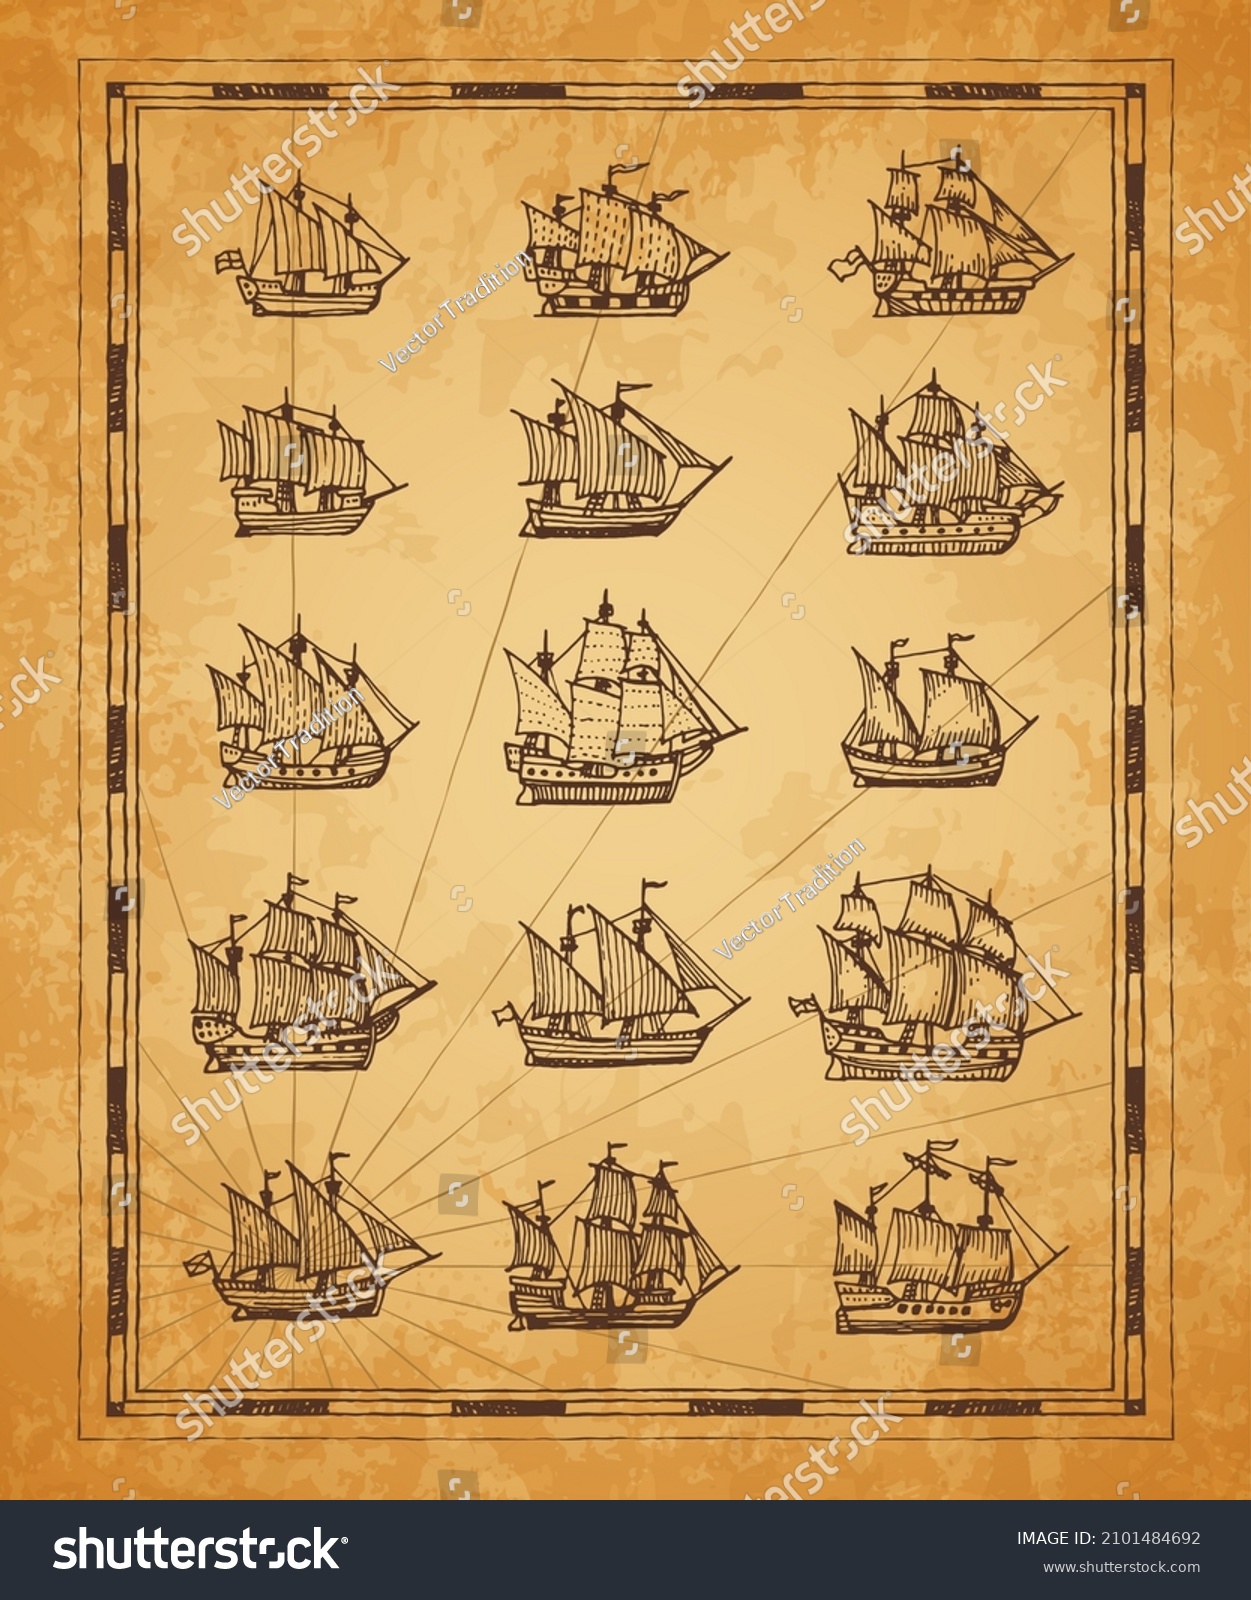 SVG of Vintage map sail ships, sailboat, brigantine sketch. Vector engraved sea vessels on ancient torn brown papyrus. Engraving retro schooner, corvette and brig, galleon and caravel, clipper of pirate map svg